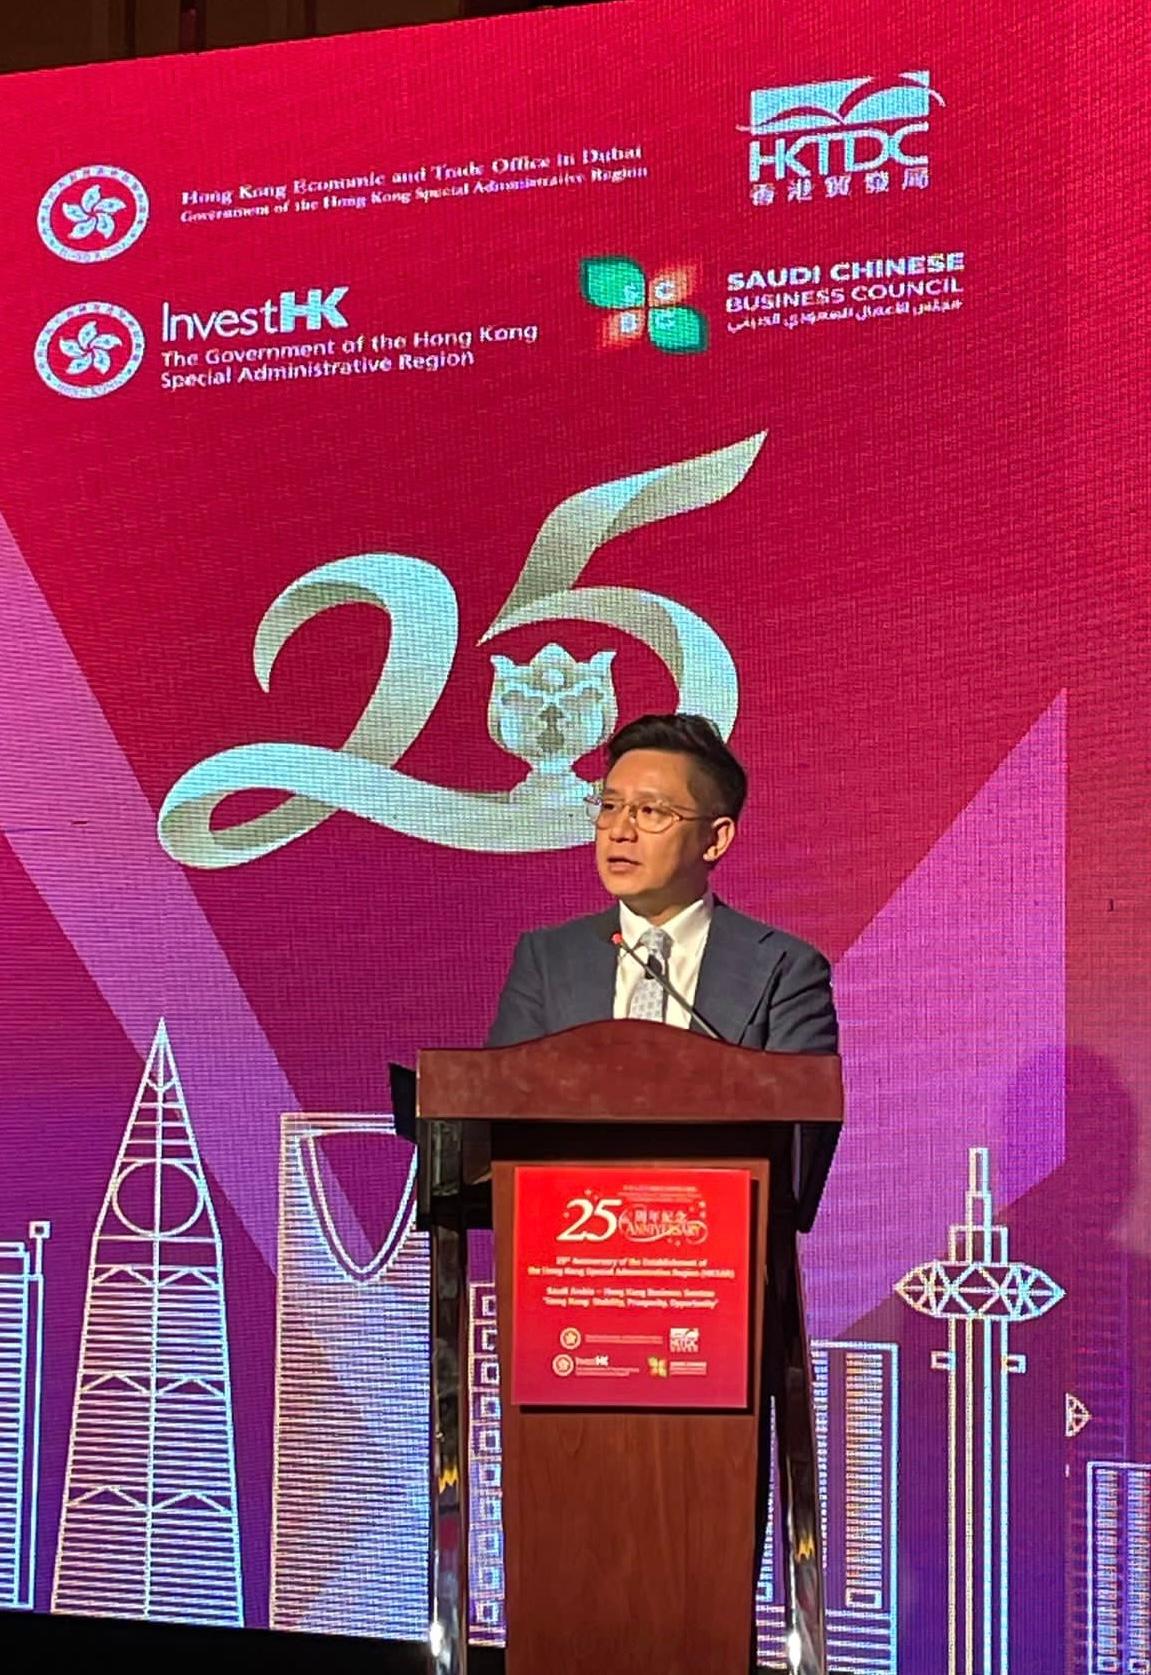 The Hong Kong Economic and Trade Office in Dubai (Dubai ETO) held a business seminar in Riyadh, Saudi Arabia, on November 10 (Riyadh time) to celebrate the 25th anniversary of the establishment of the Hong Kong Special Administrative Region. Photo shows the Director-General of the Dubai ETO, Mr Damian Lee, speaking at the event.